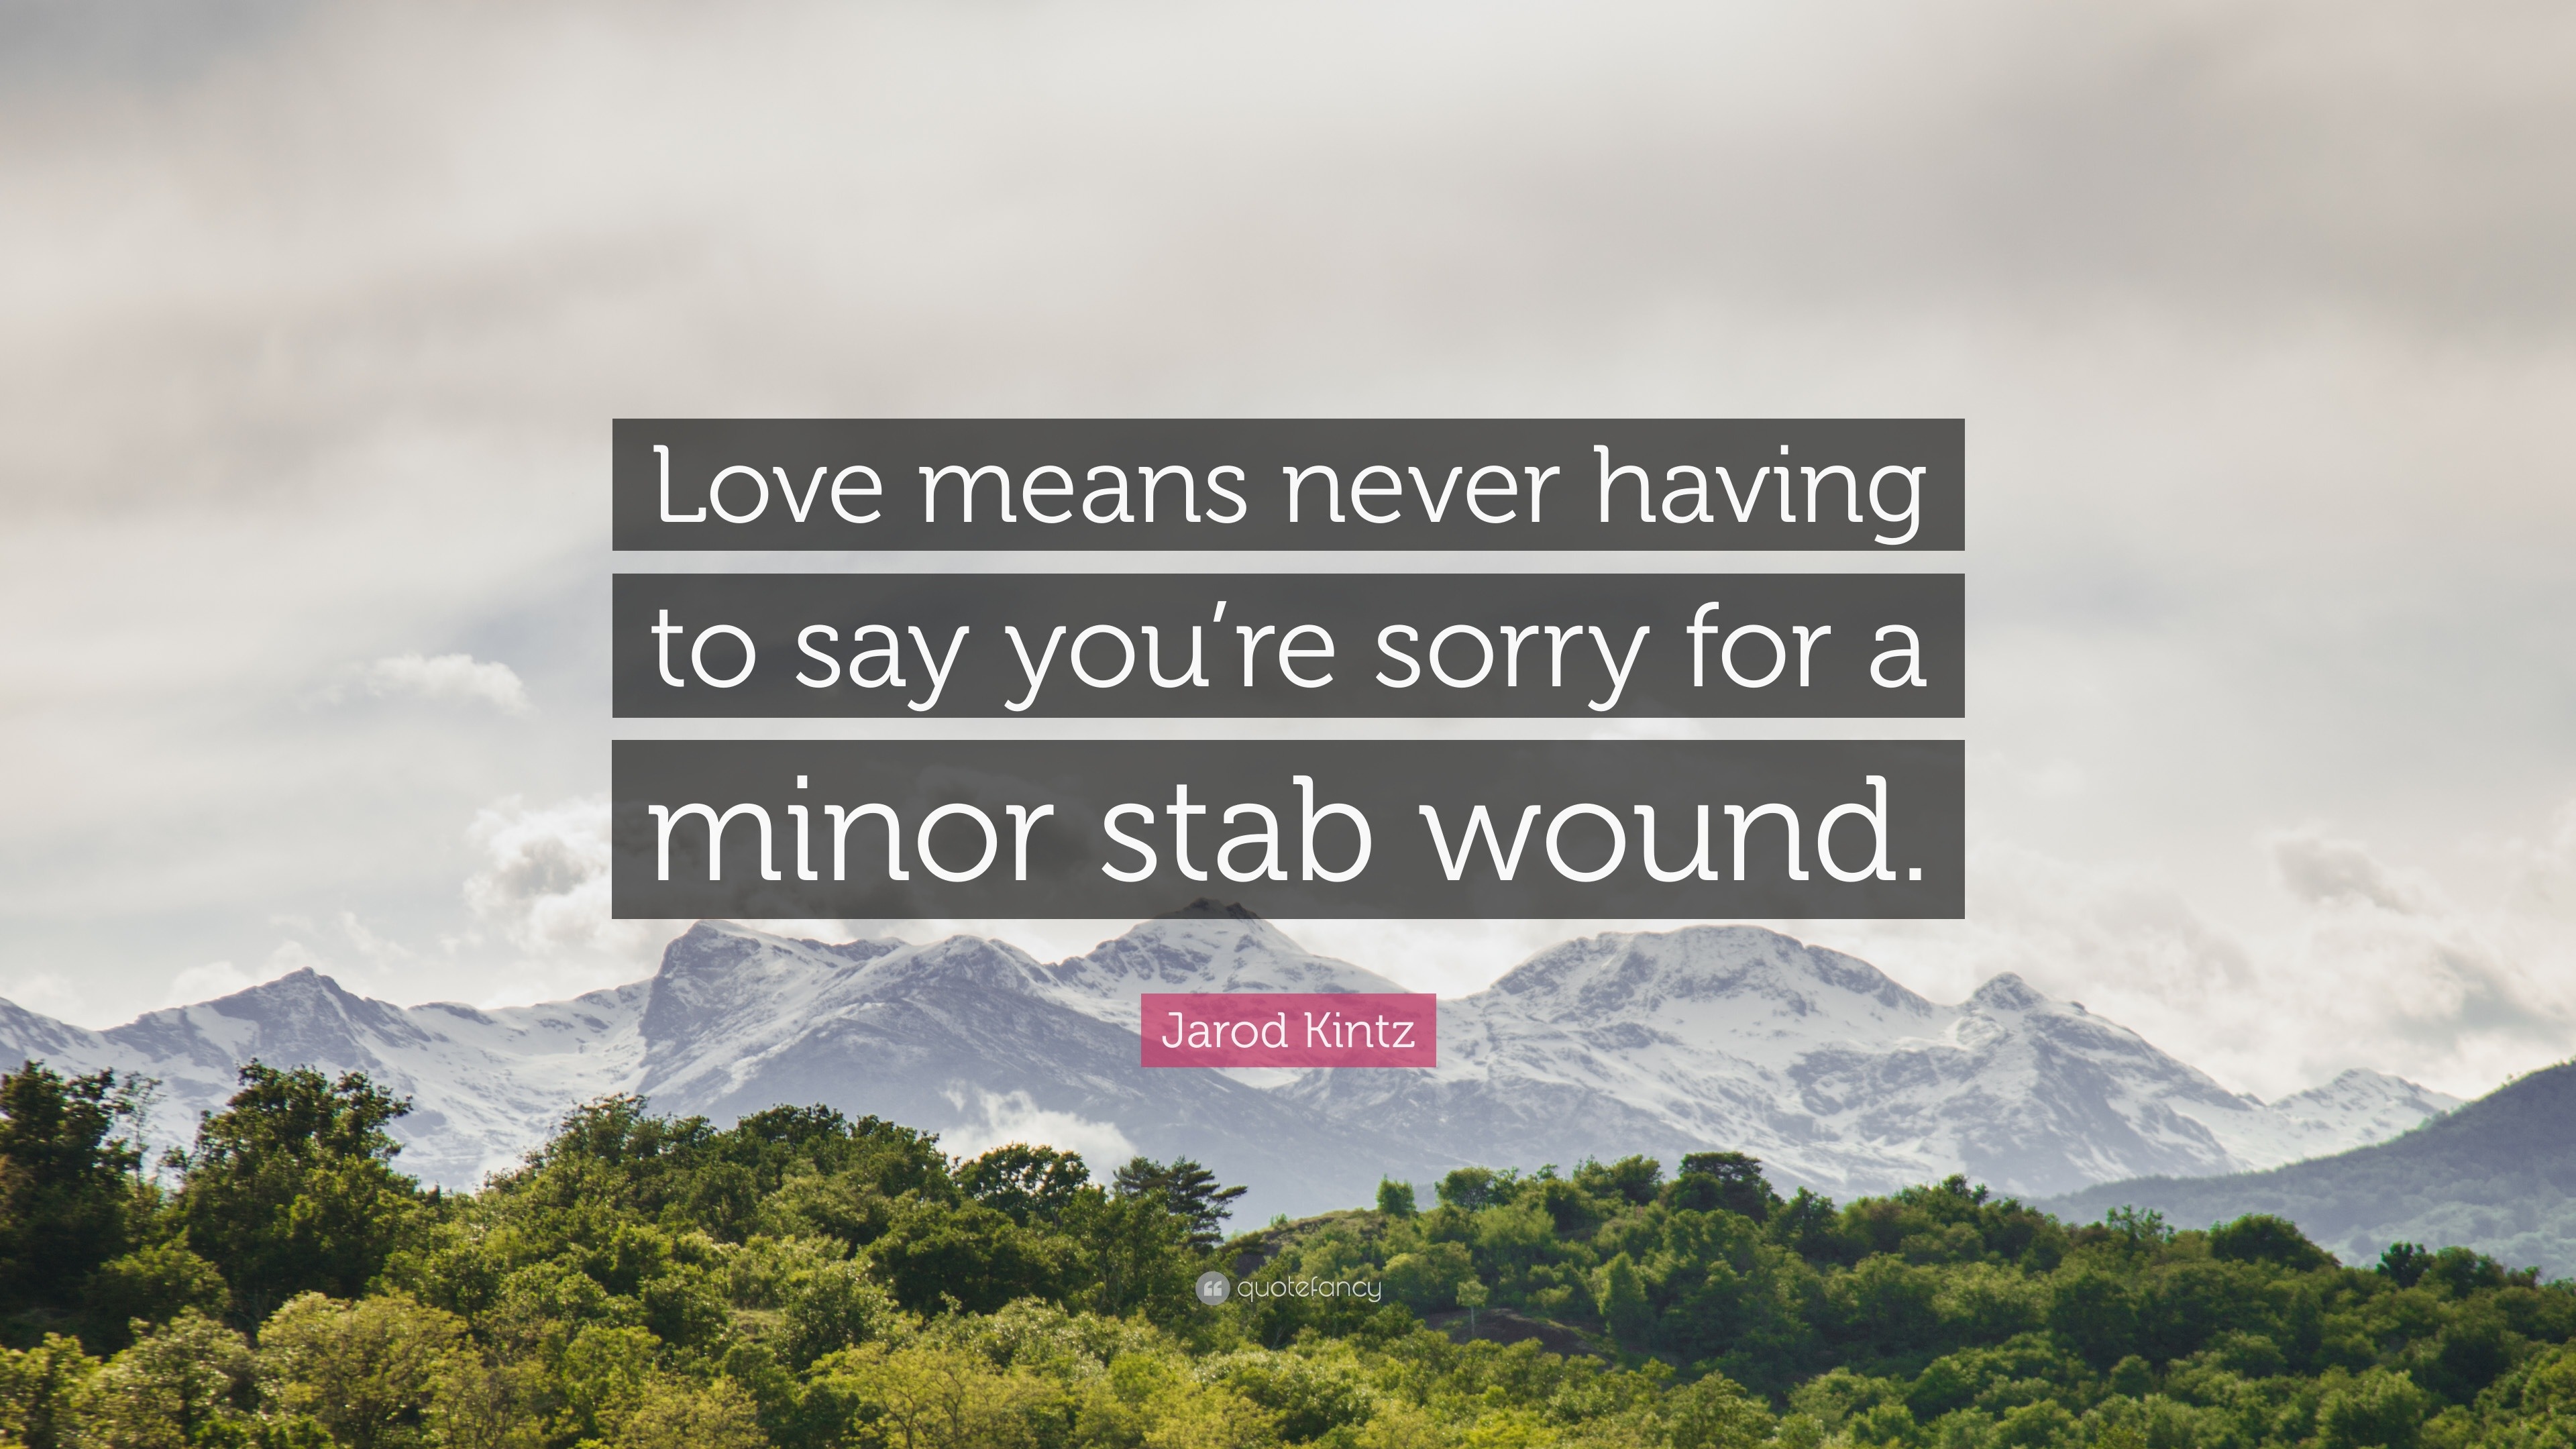 Jarod Kintz Quote “Love means never having to say you re sorry for